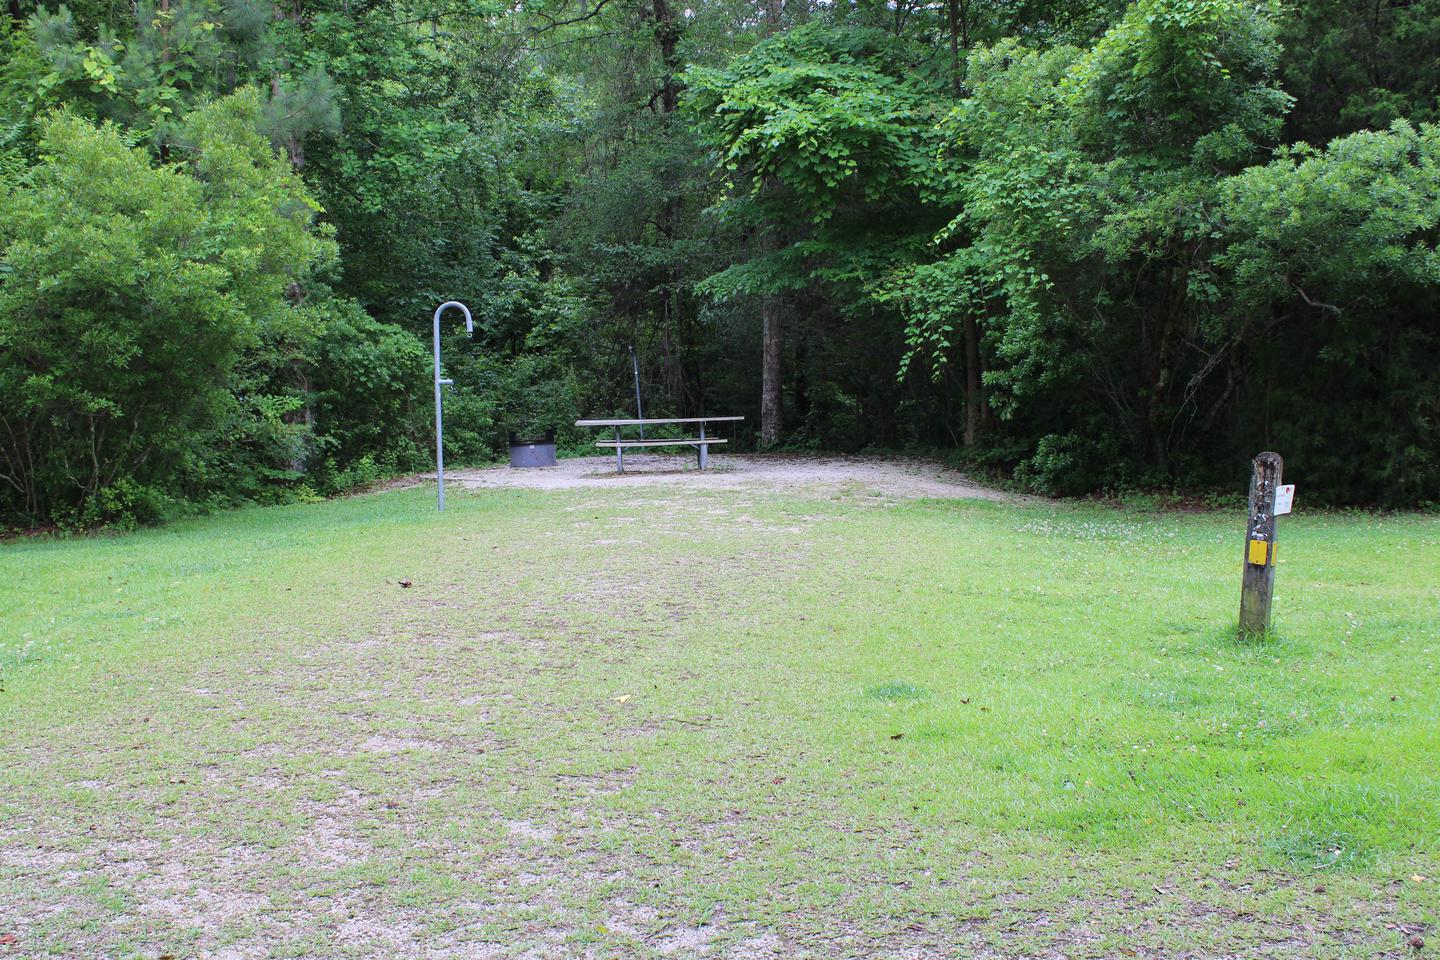 Flanners Beach Campsite #22Driveway for Campsite